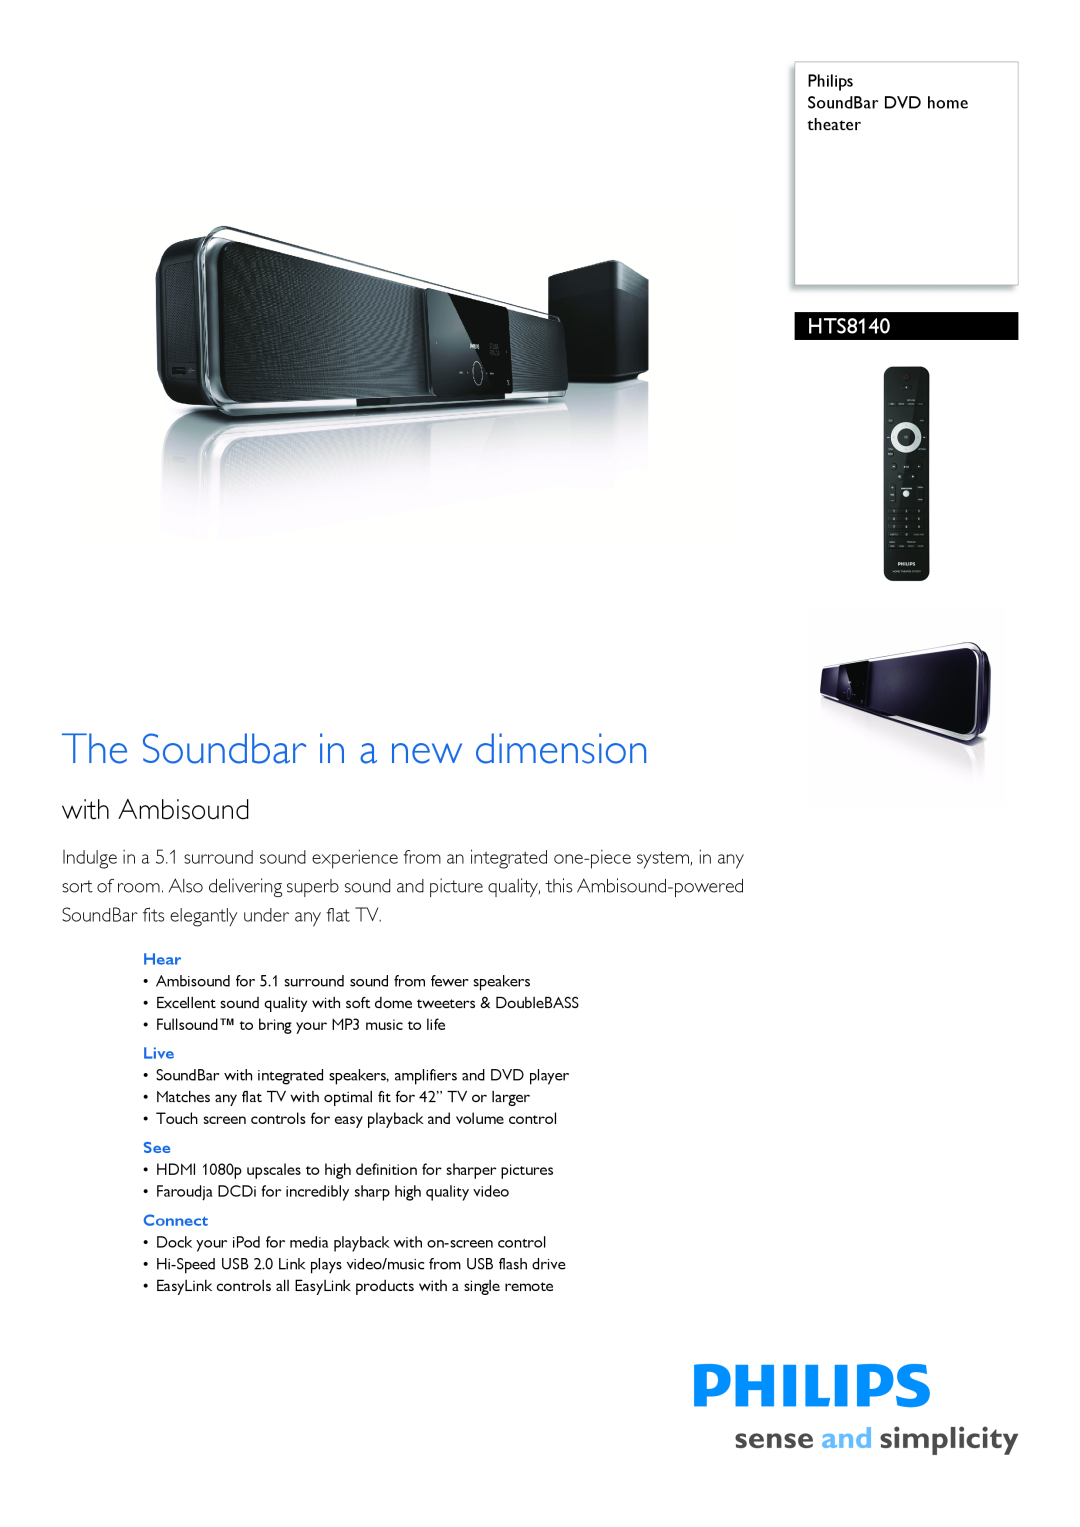 Philips HTS8140/98 manual Philips SoundBar DVD home theater, The Soundbar in a new dimension, with Ambisound 